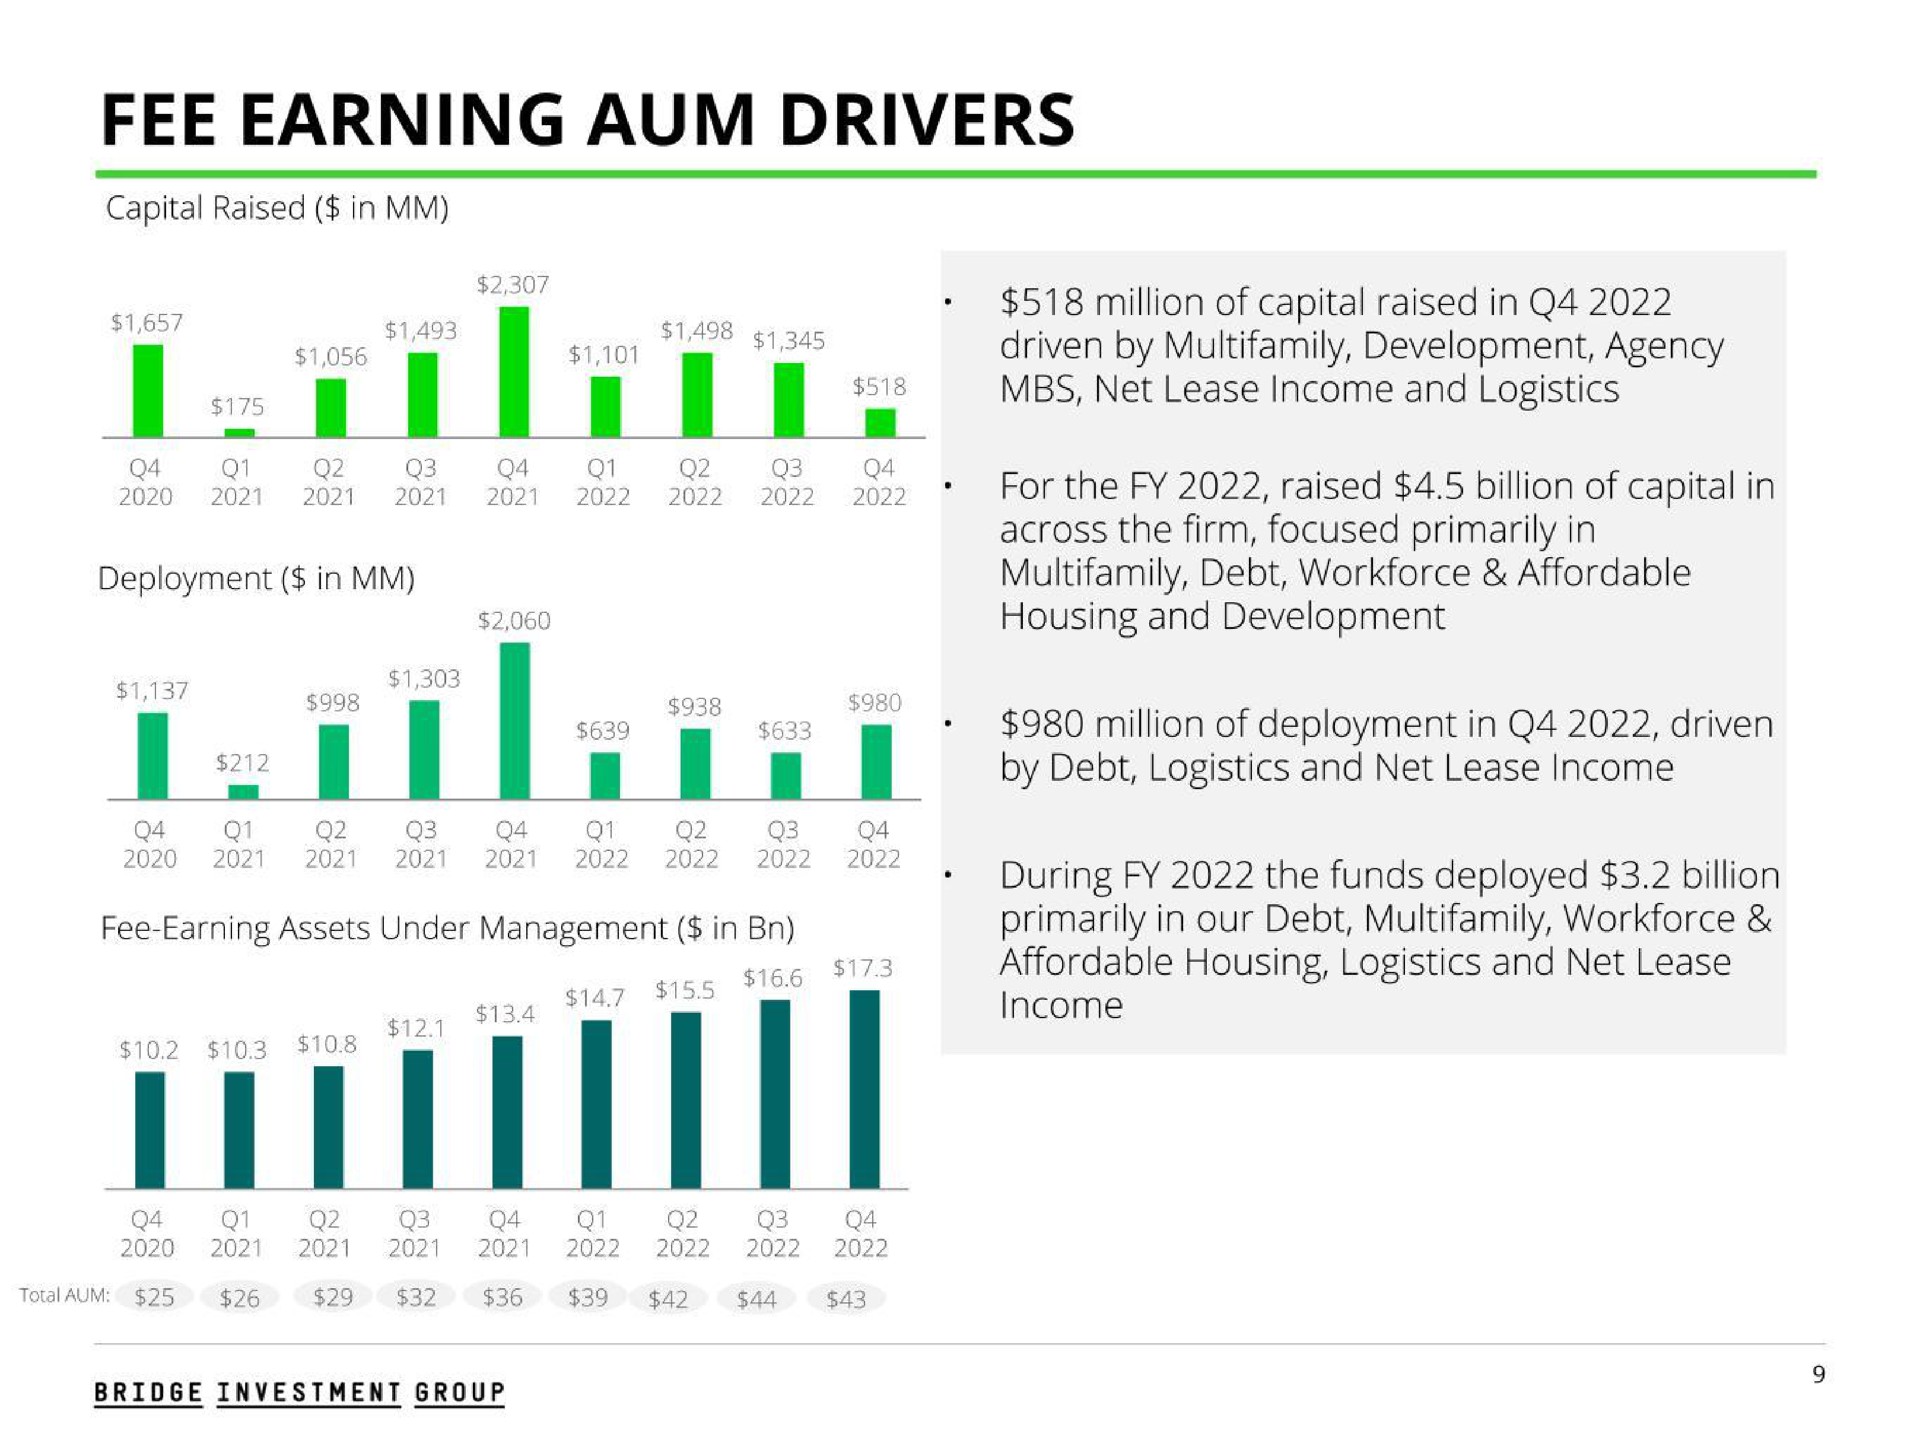 fee earning aum drivers | Bridge Investment Group